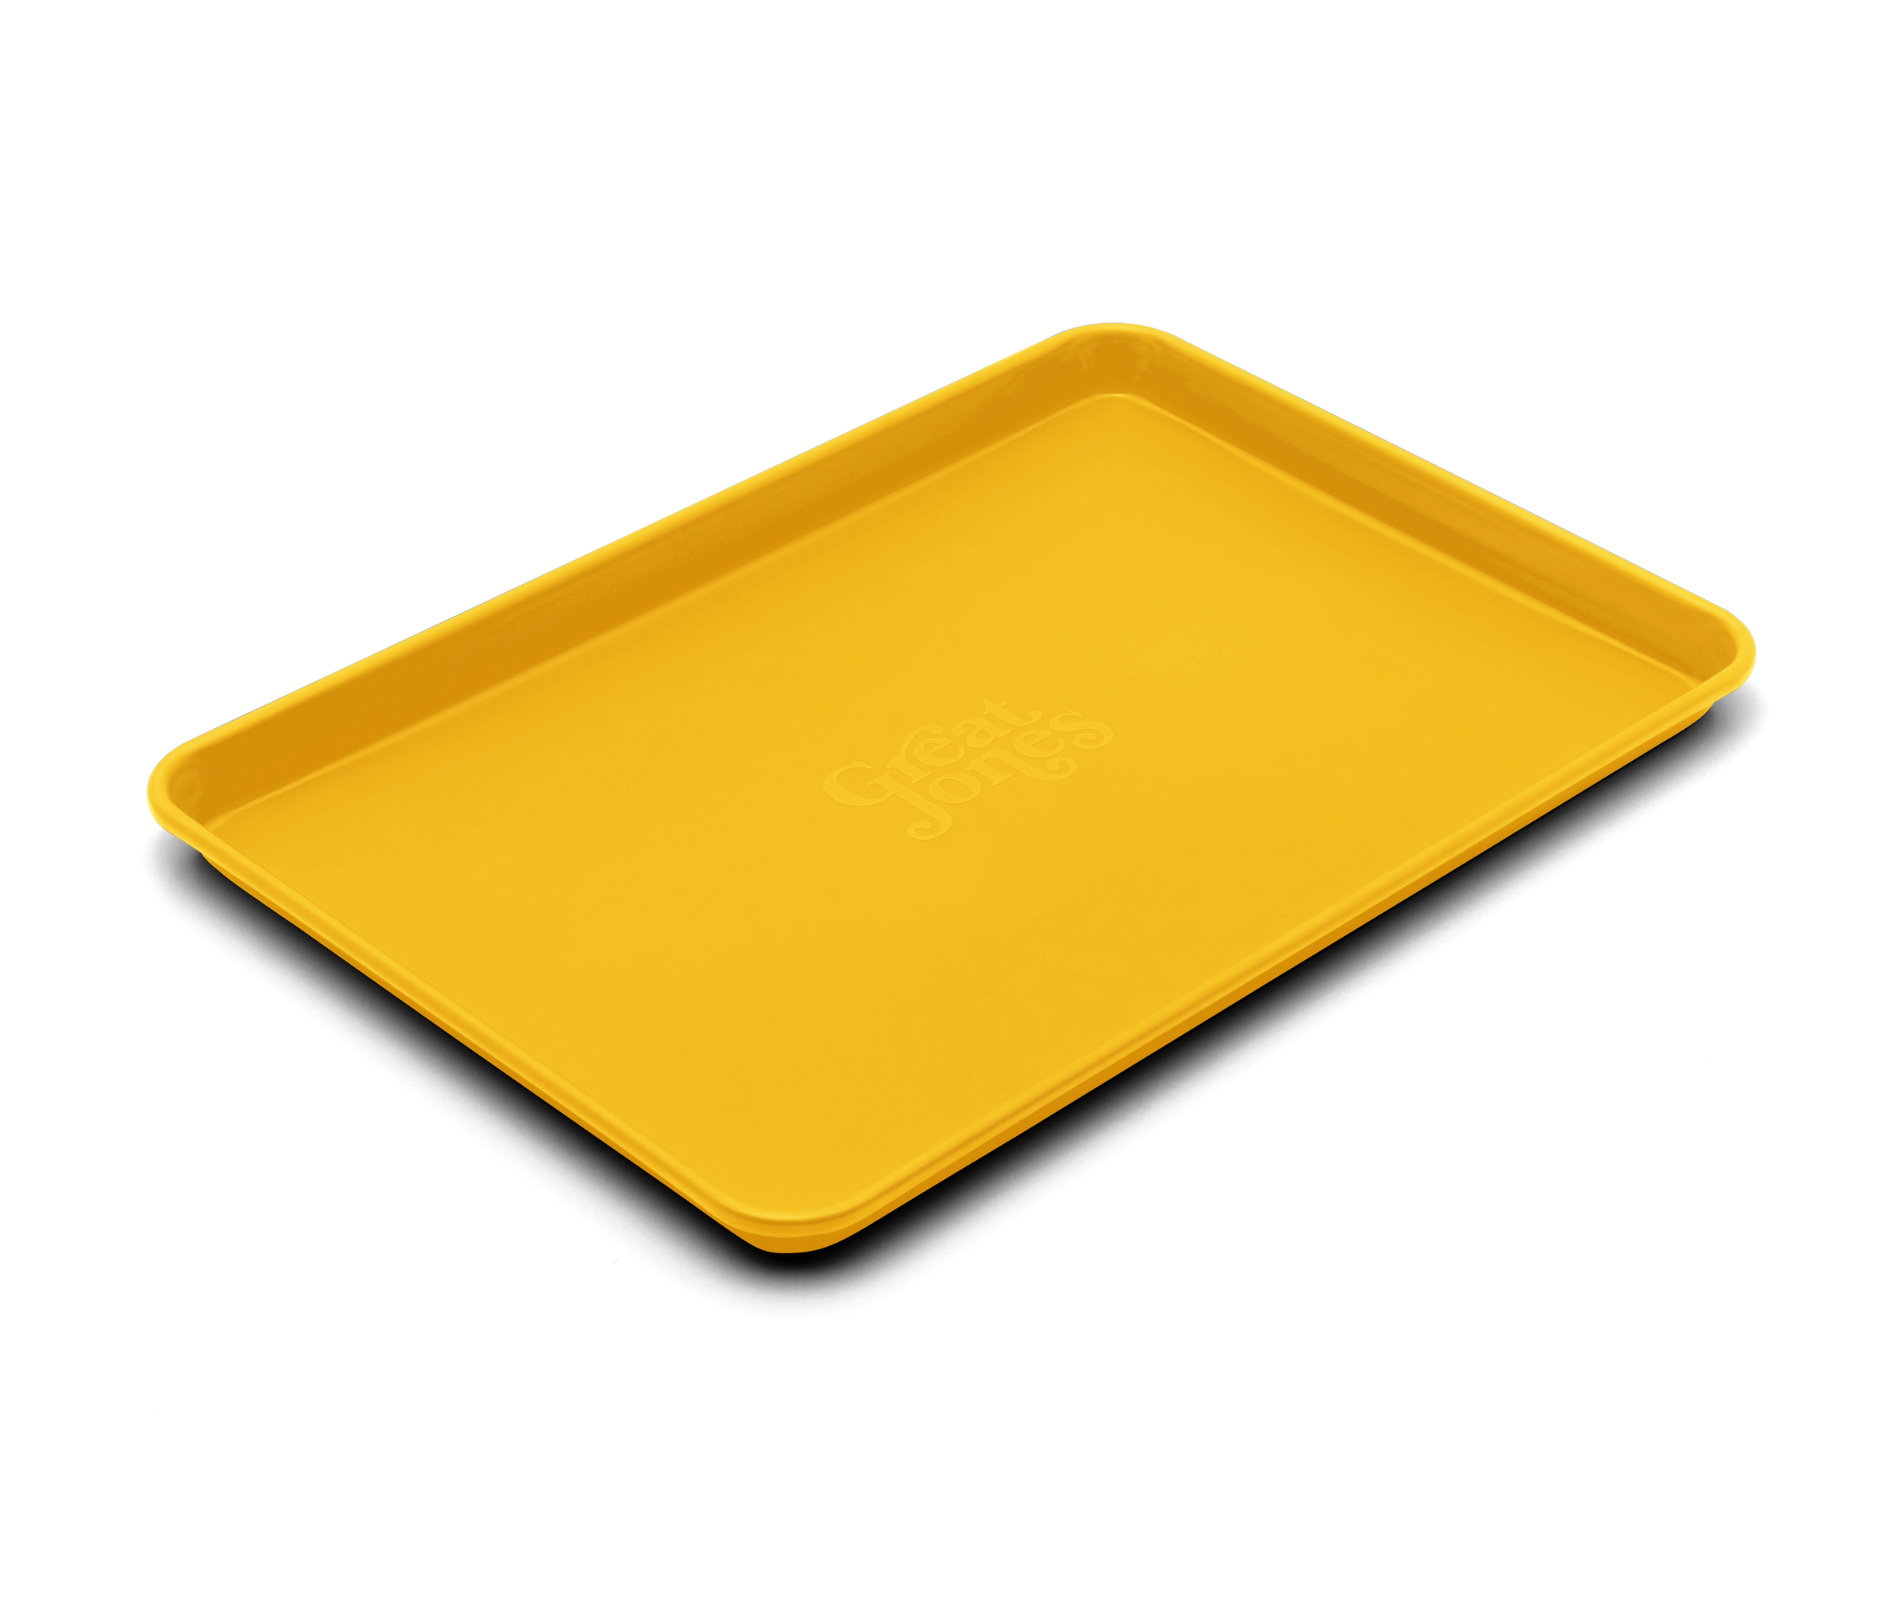 Buy one Holy Sheet half-sheet pan in sunny mustard color.